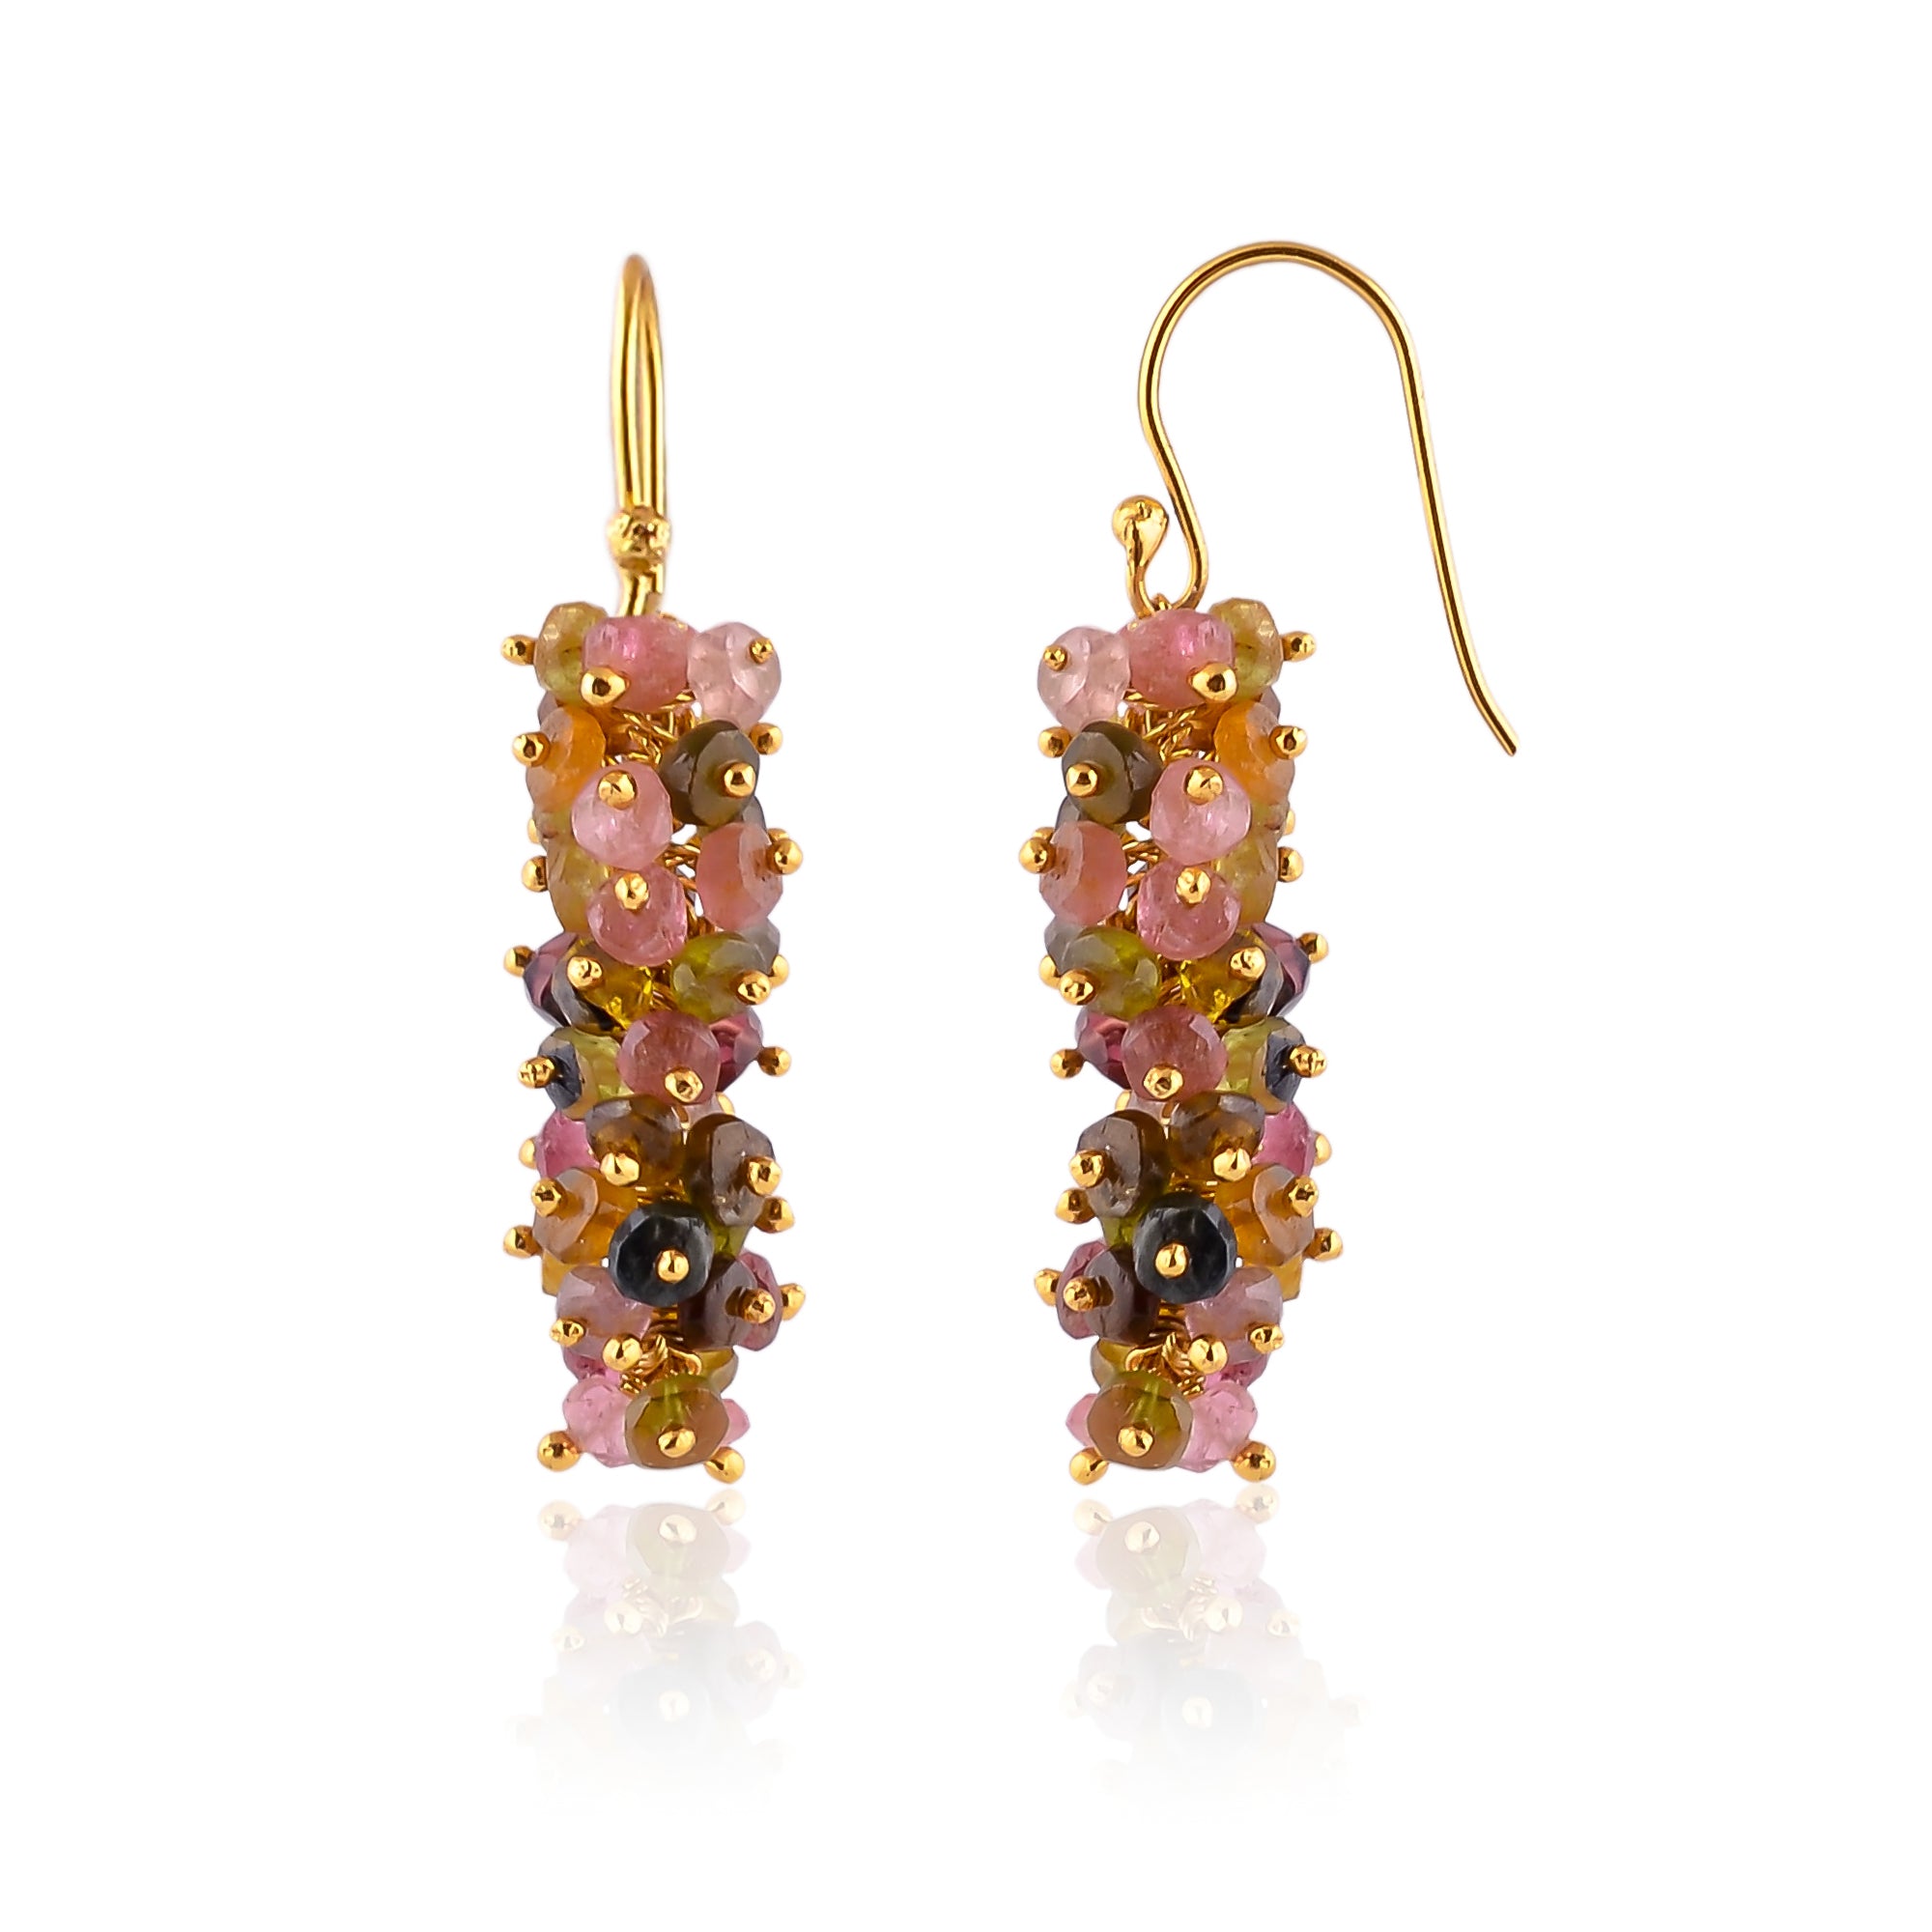 Buy Handmade Silver Gold Plated Tourmaline Grape Cluster Earring